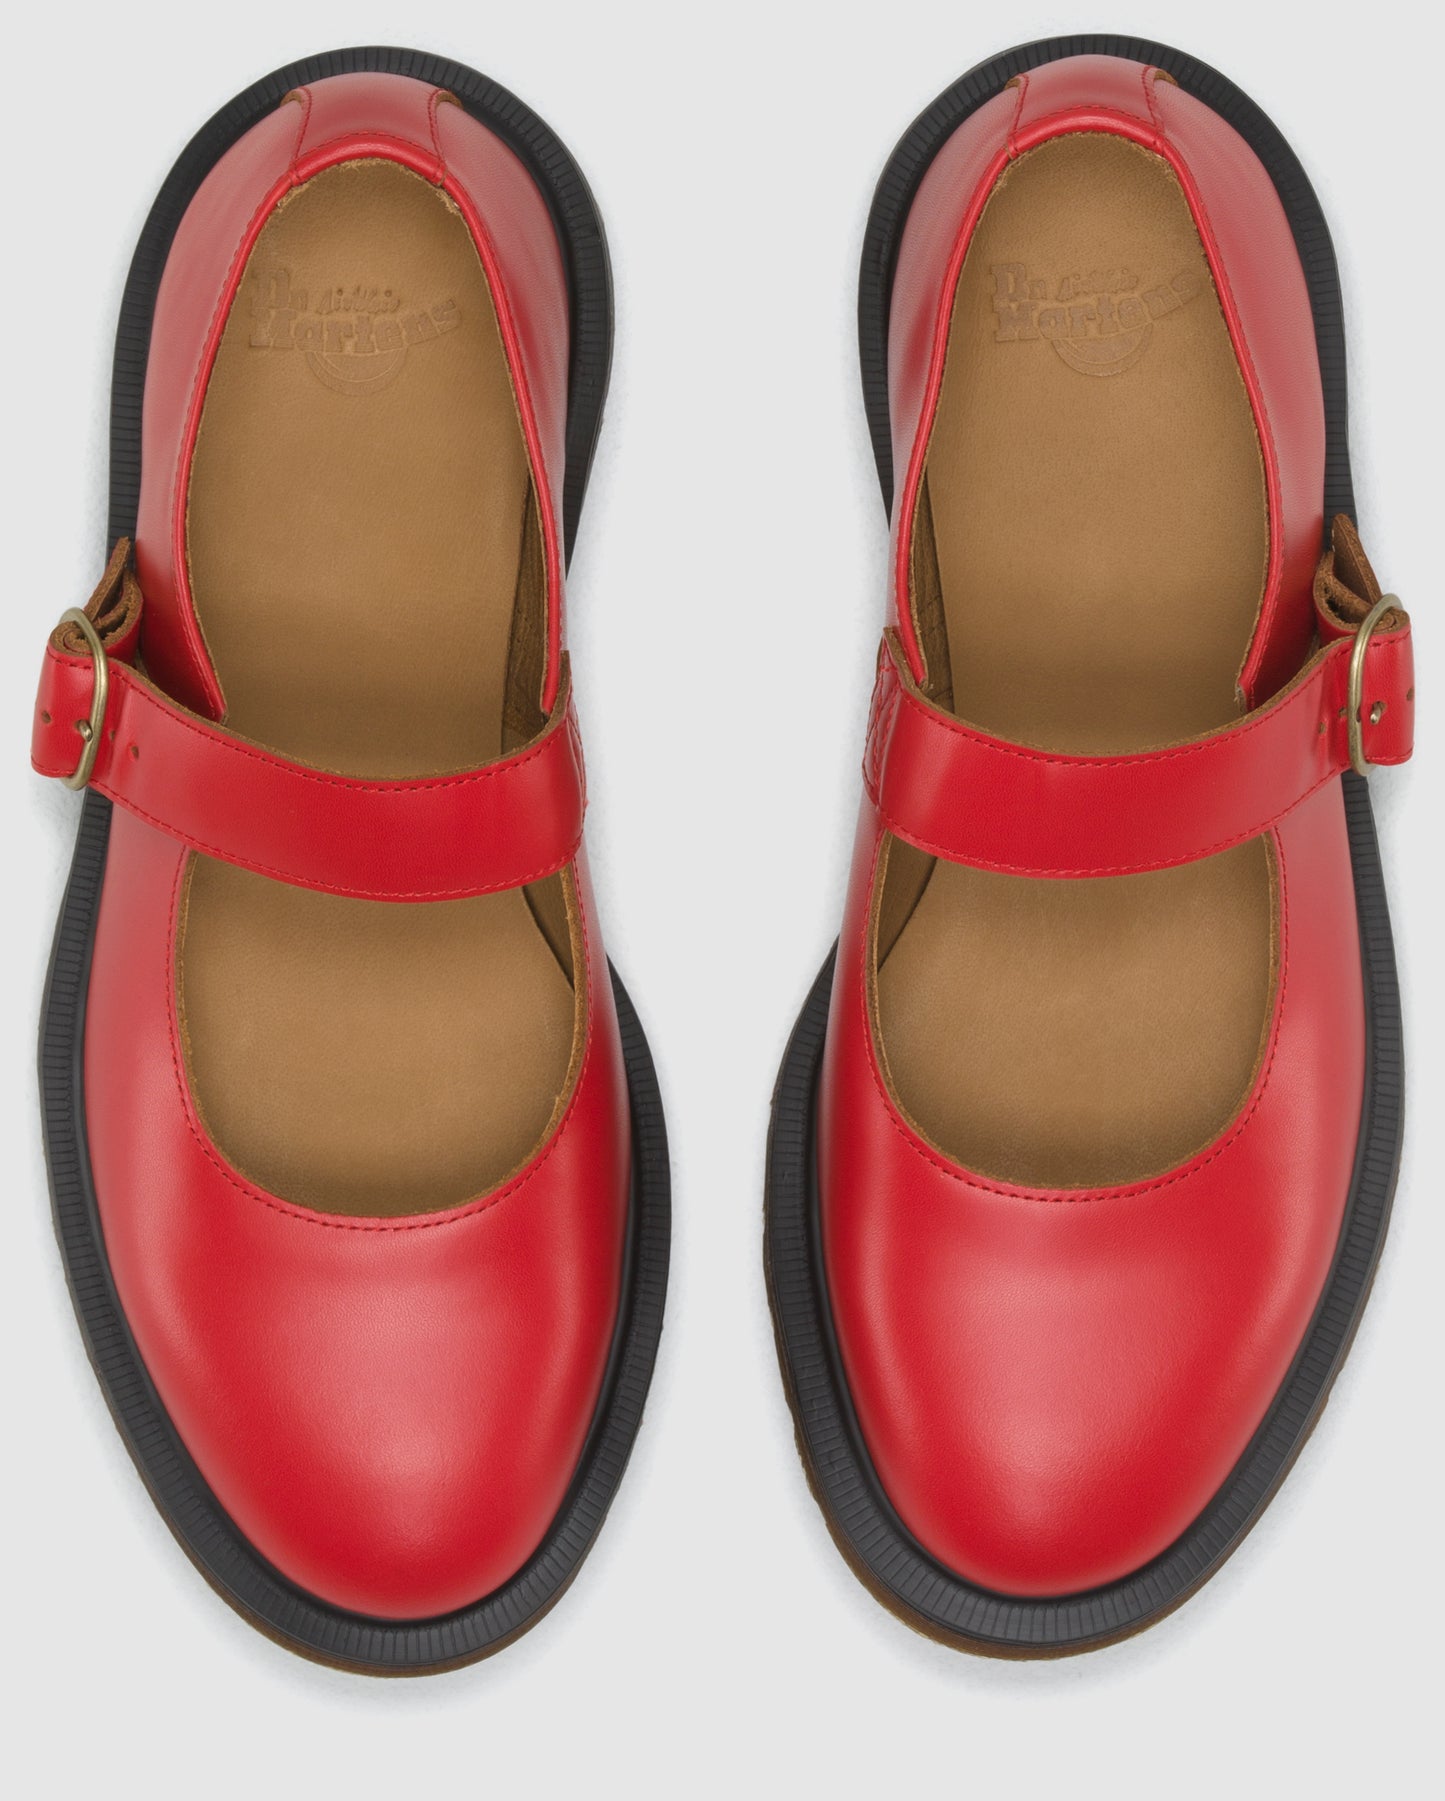 INDICA RED VINTAGE SMOOTH SHOE